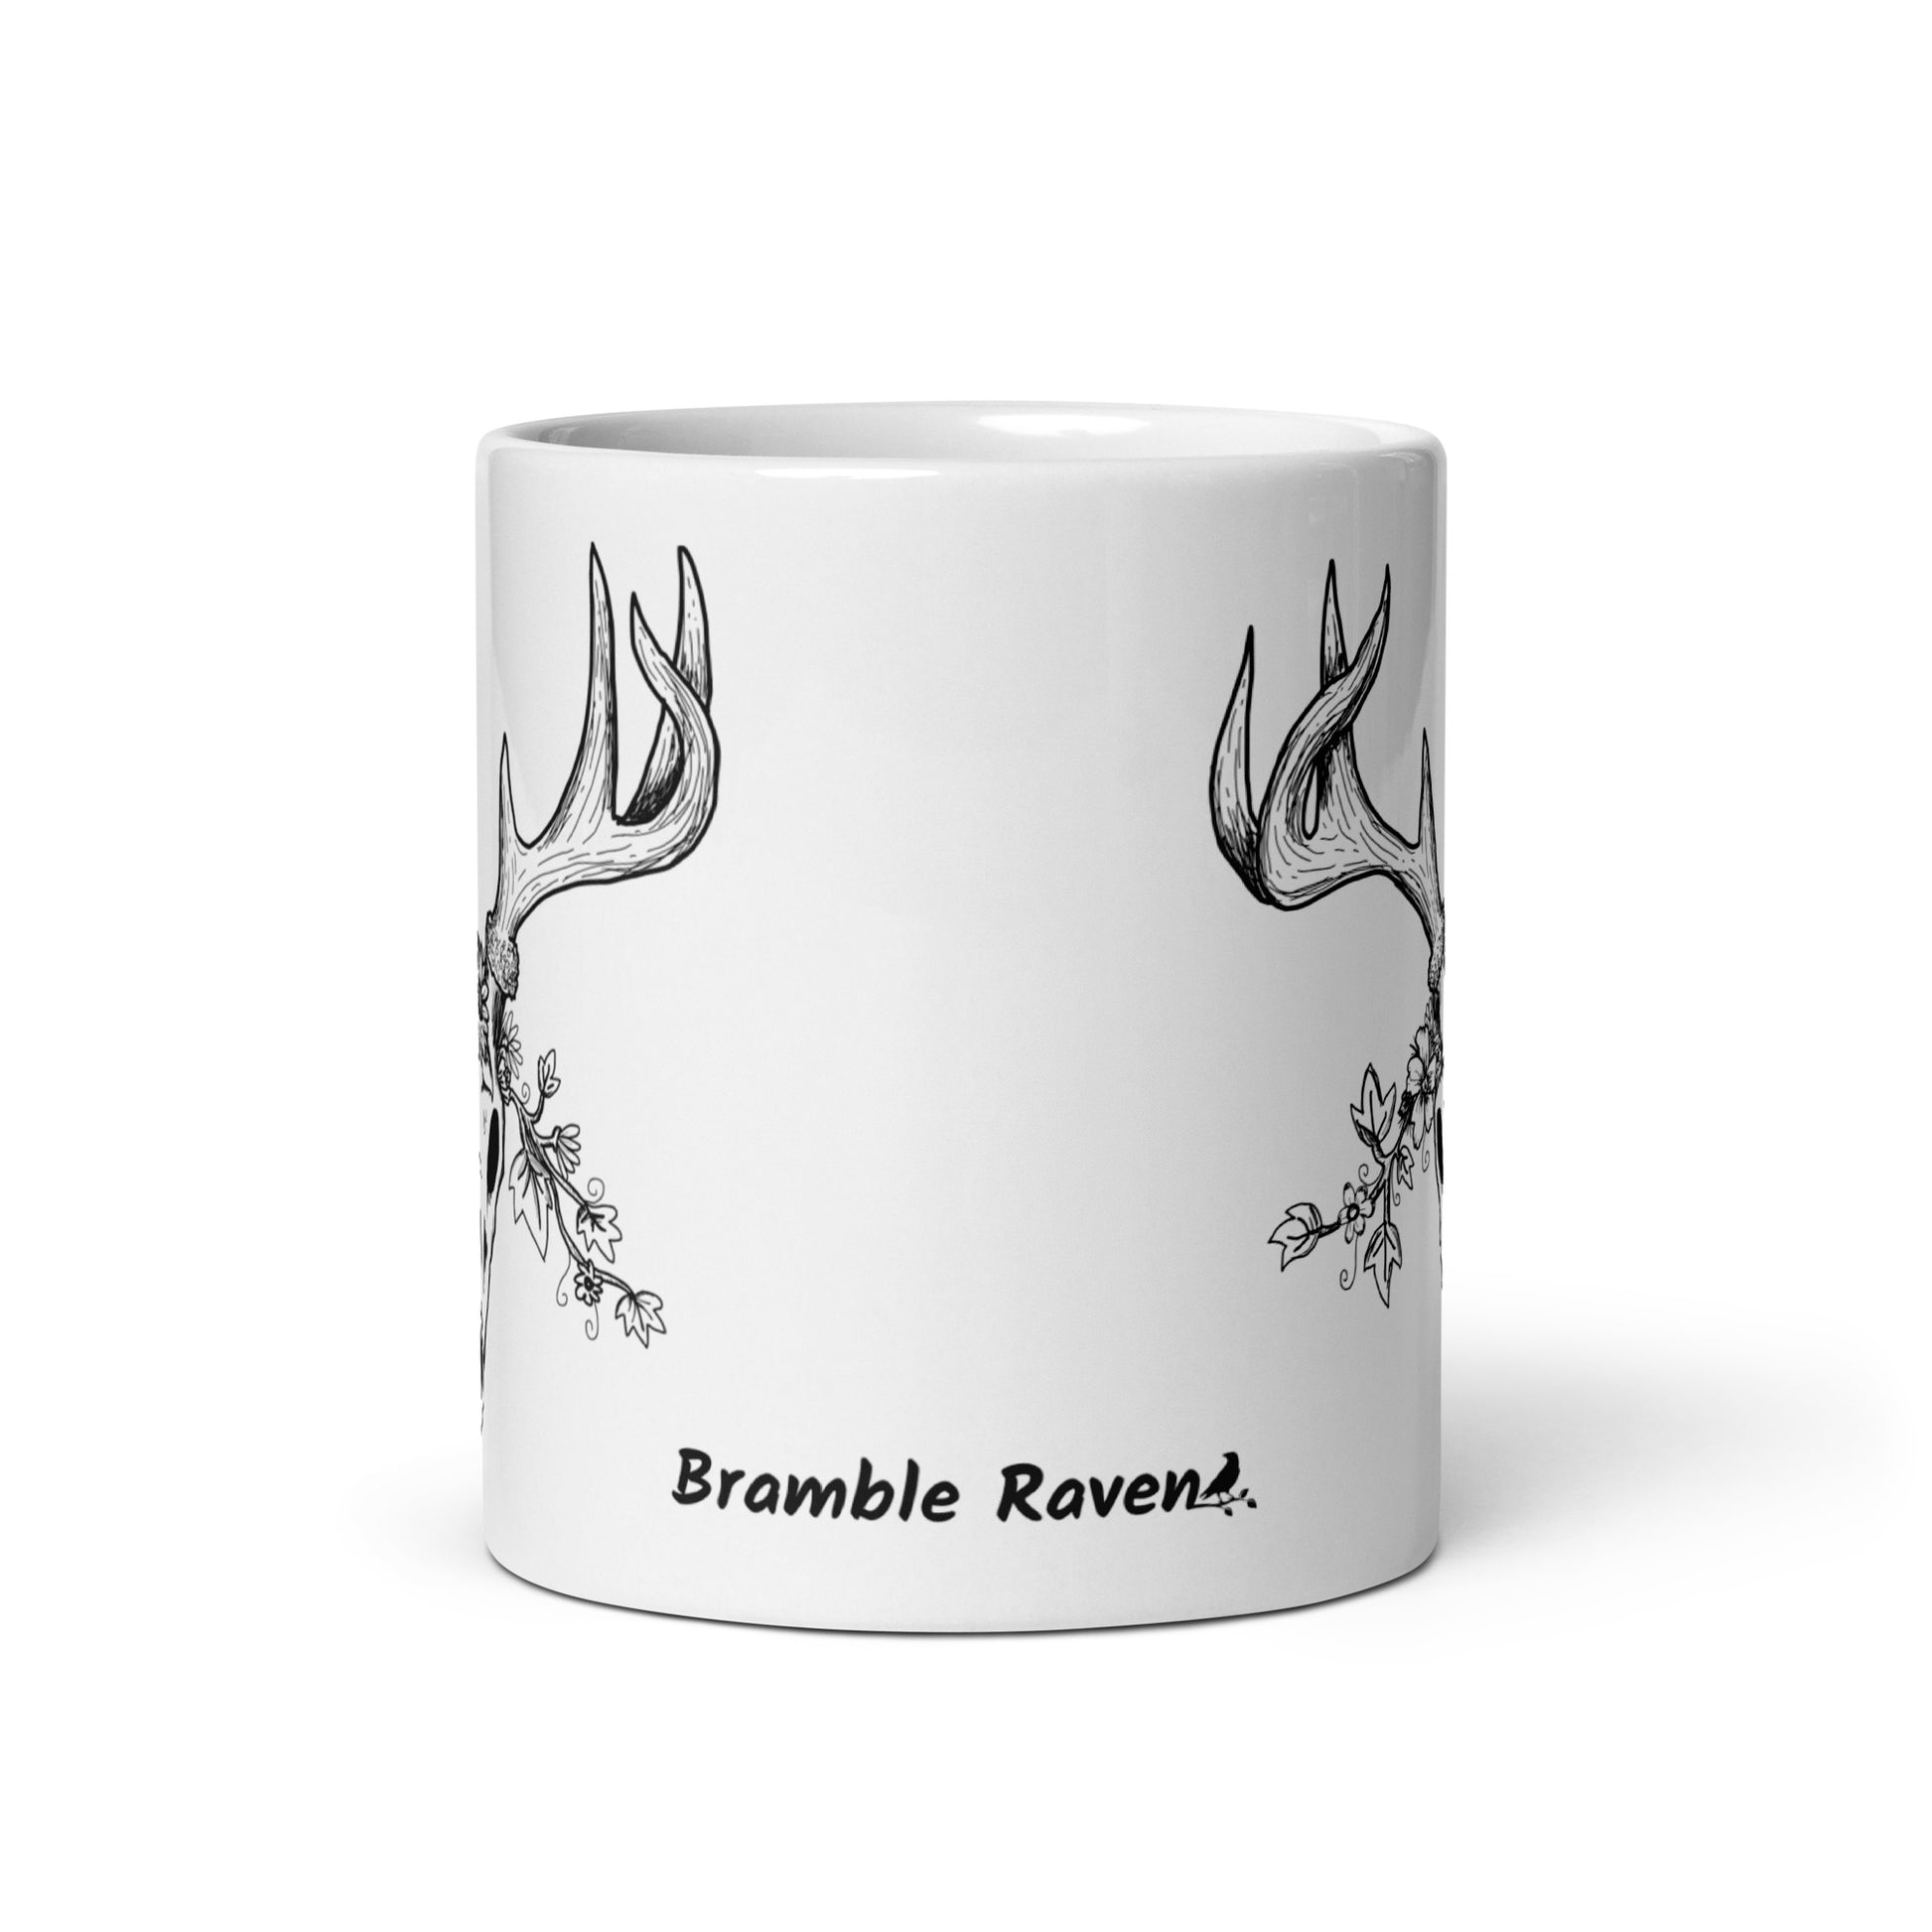 11 oz white ceramic mug. Features a double-sided hand illustrated image of a deer skull wreathed in flowers. Front view shows Bramble Raven logo.